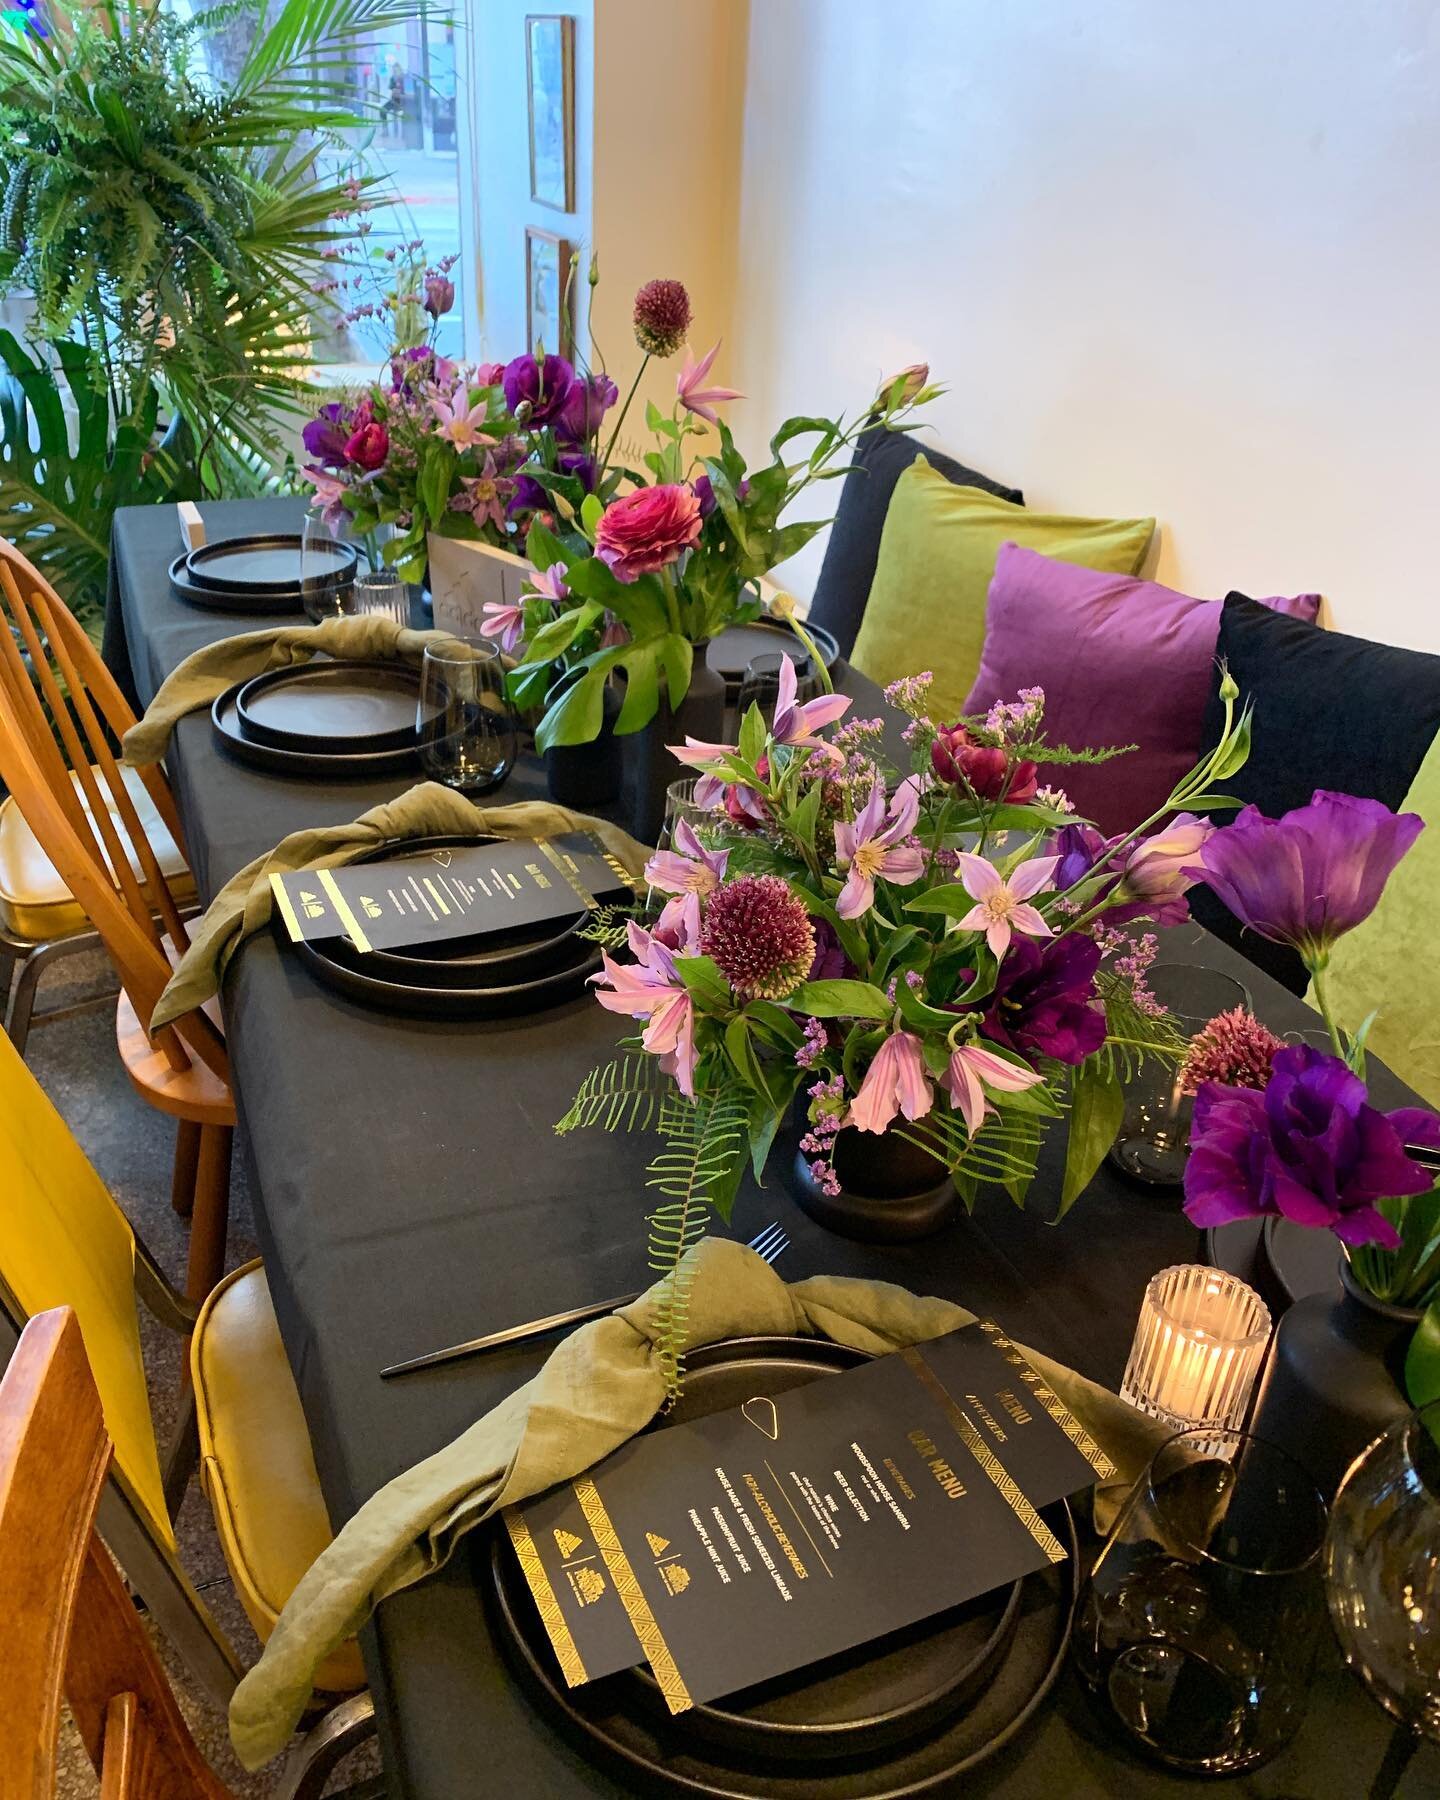 From this past week with @adidas @blackpanther &bull; an intimate pre-premiere dinner table scape set for 30 at @woodspoon produced by @wearecrownandconquer 🖤